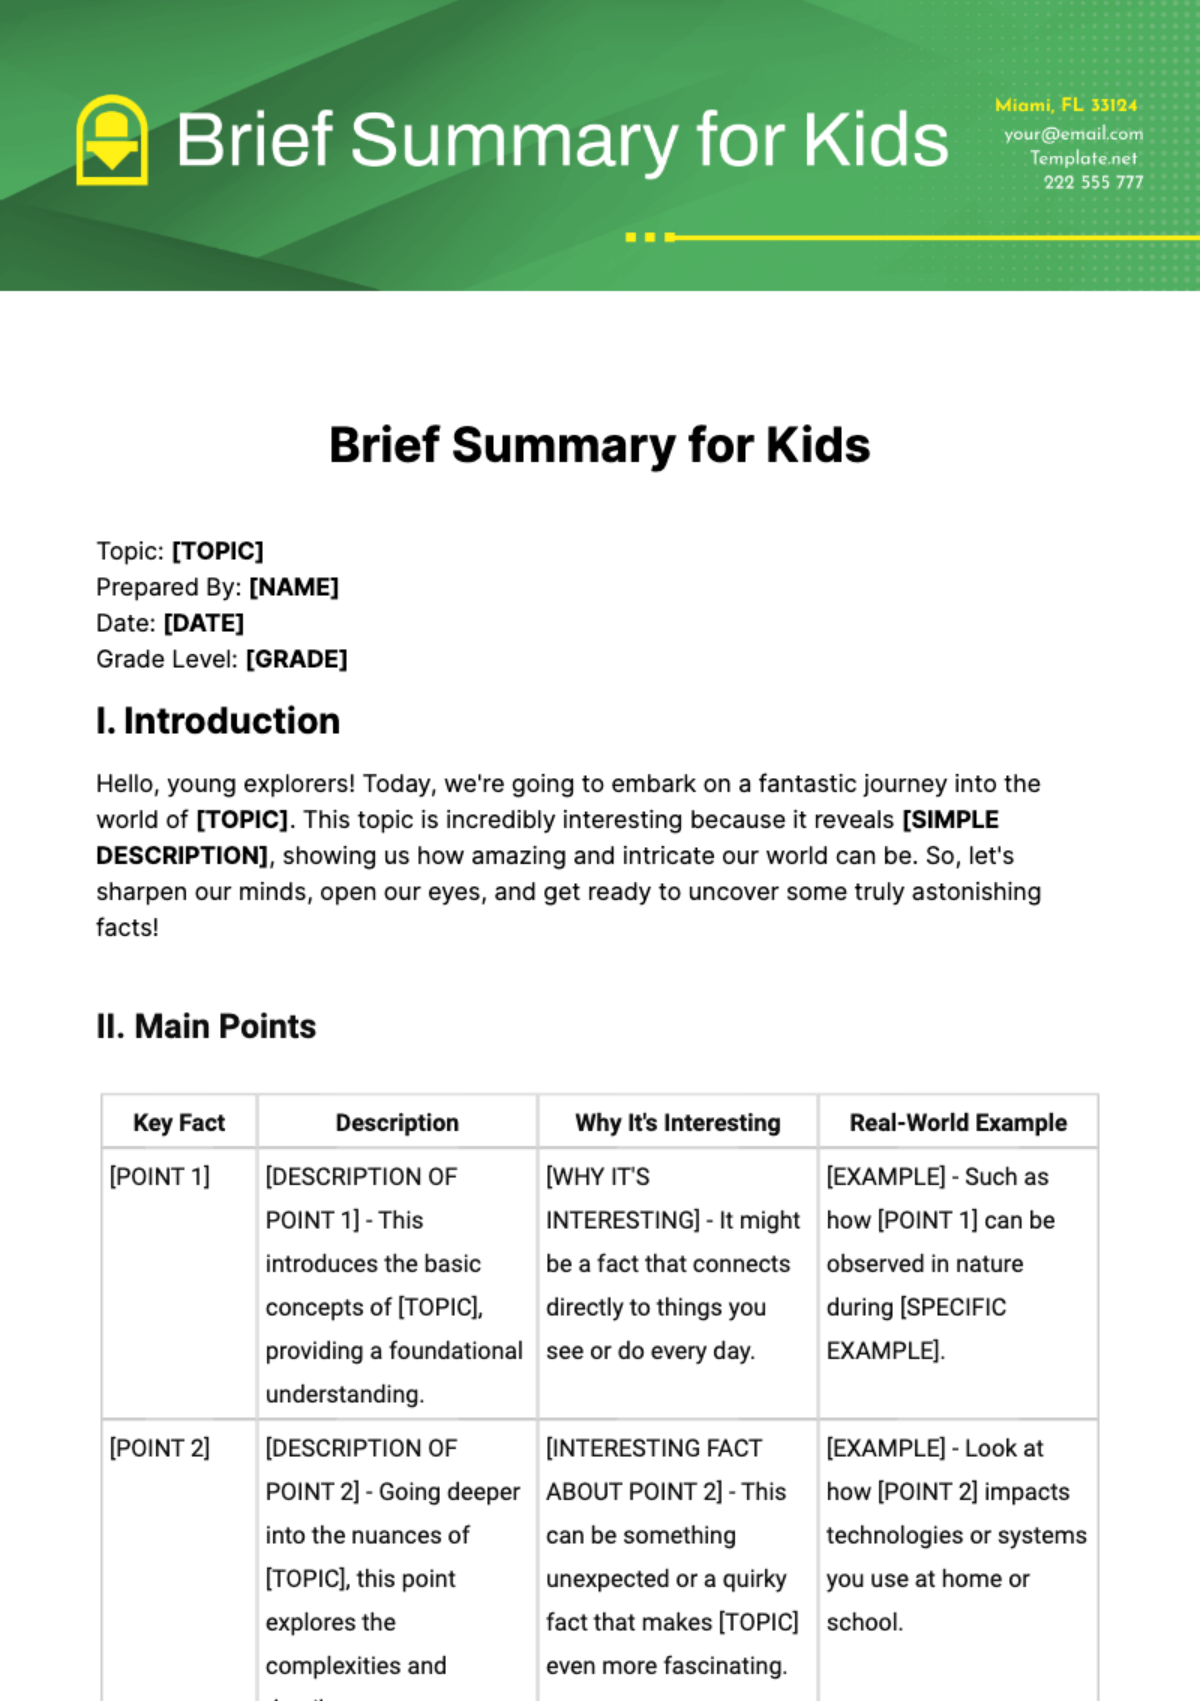 Brief Summary for Kids Template